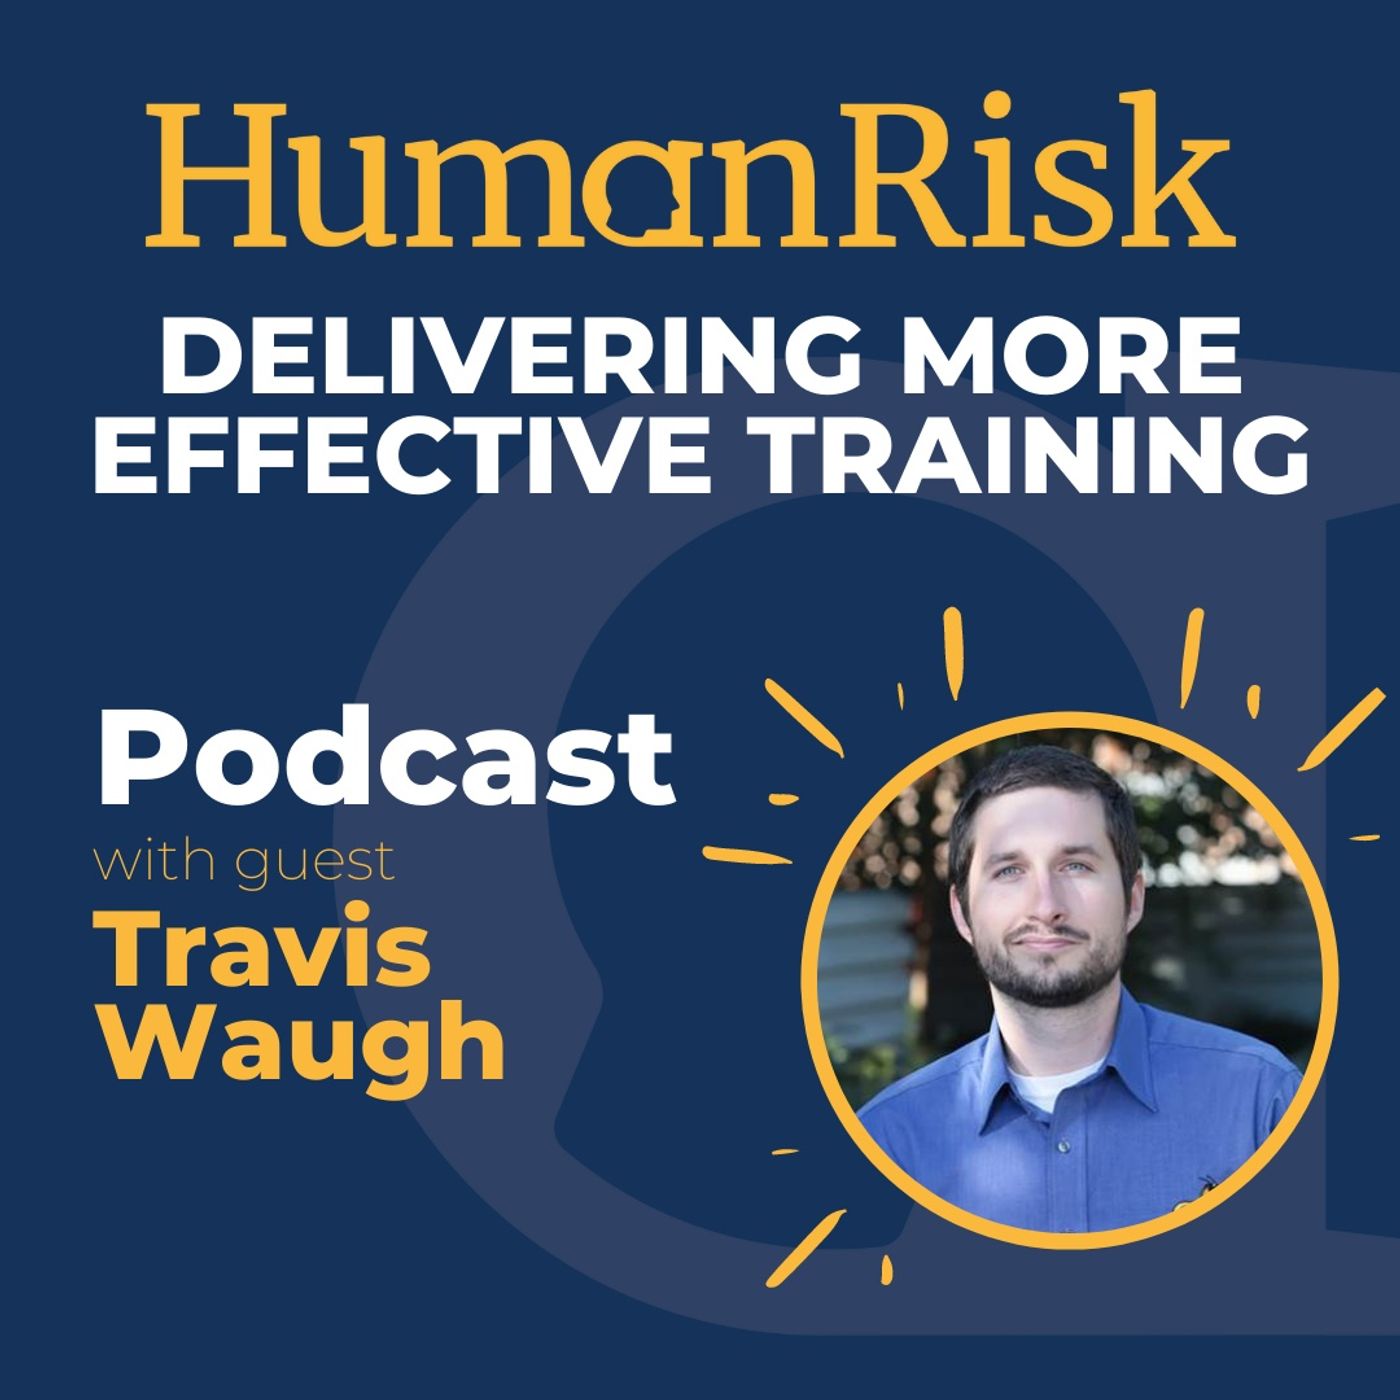 Travis Waugh on delivering more effective training